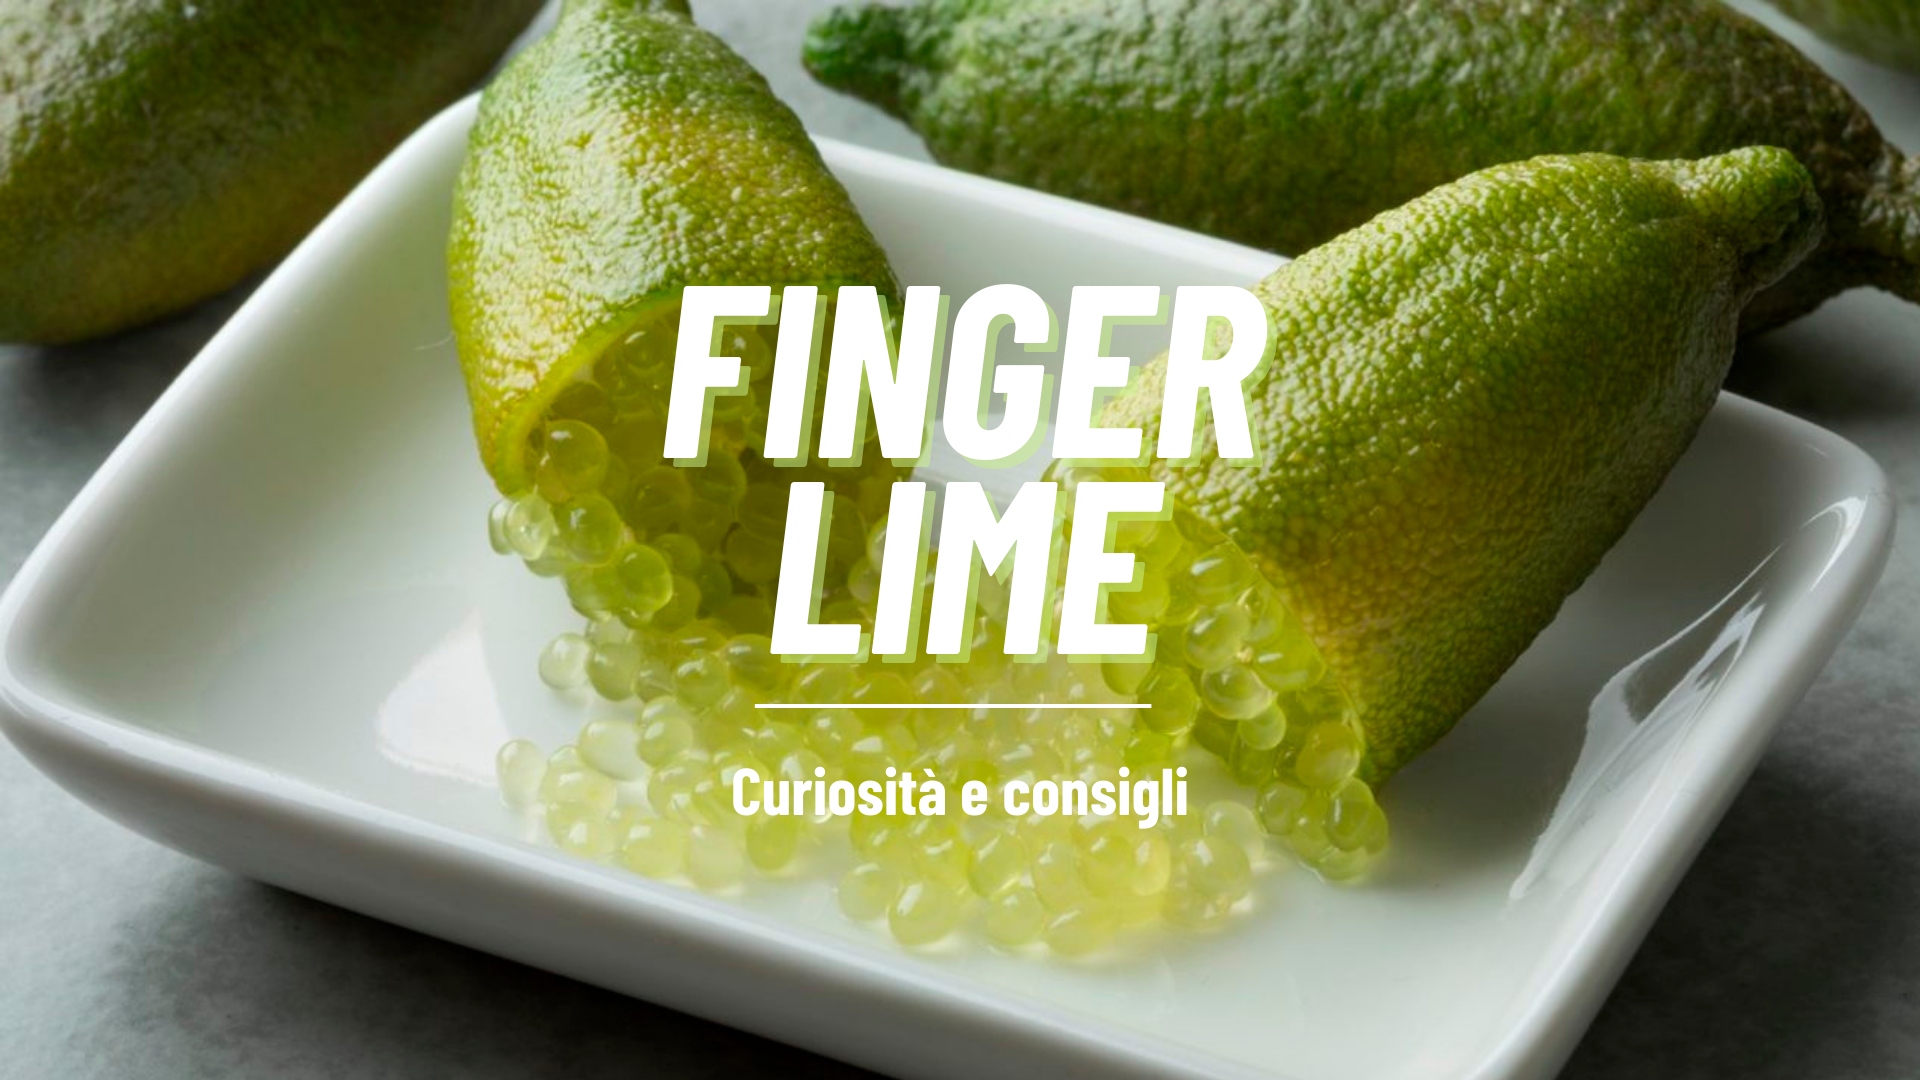 finger lime o limone caviale 